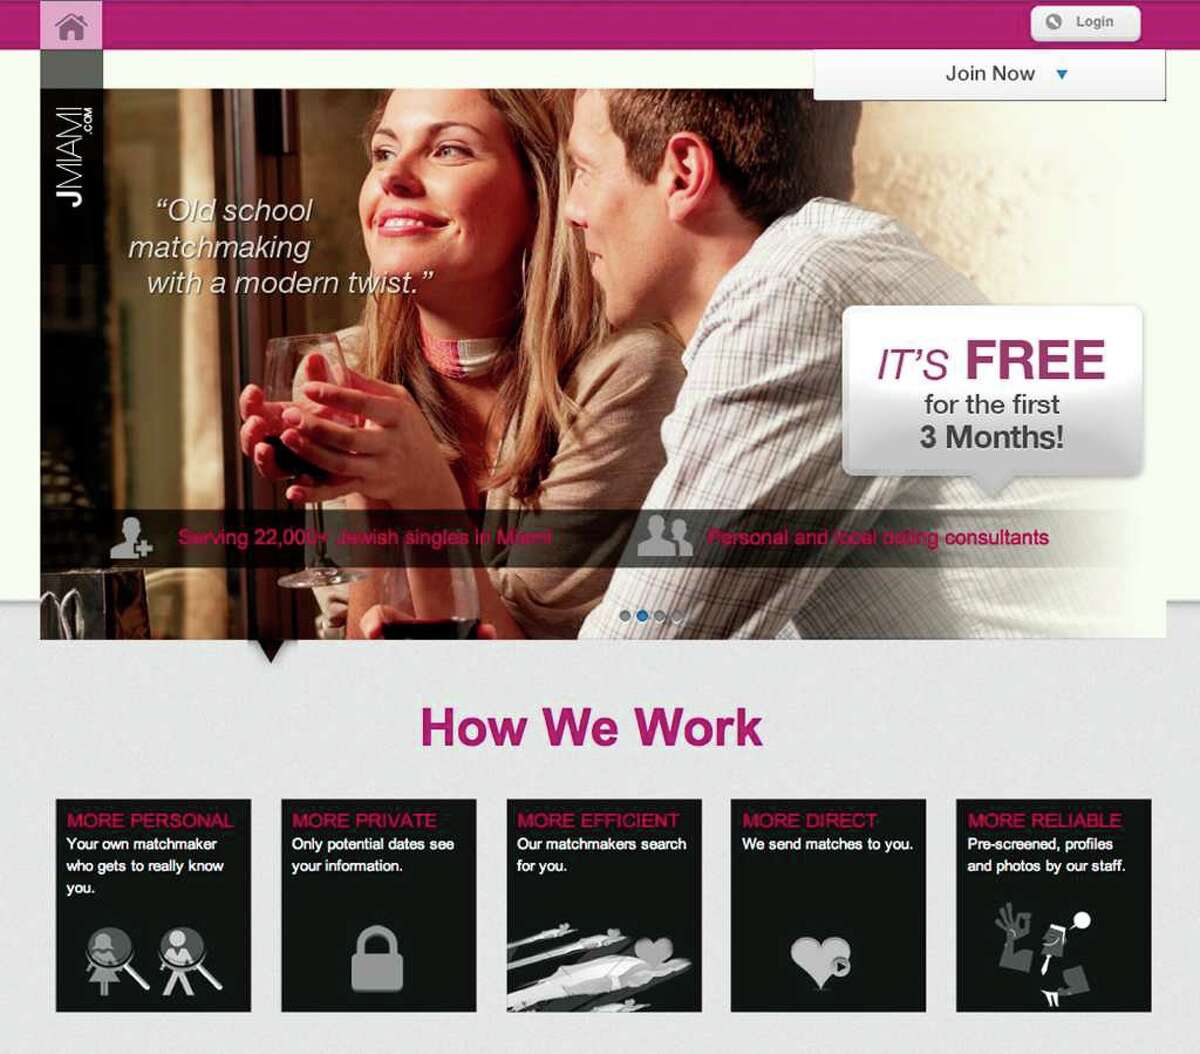 Jewish singles can use websites such as JMiami to find them a match.